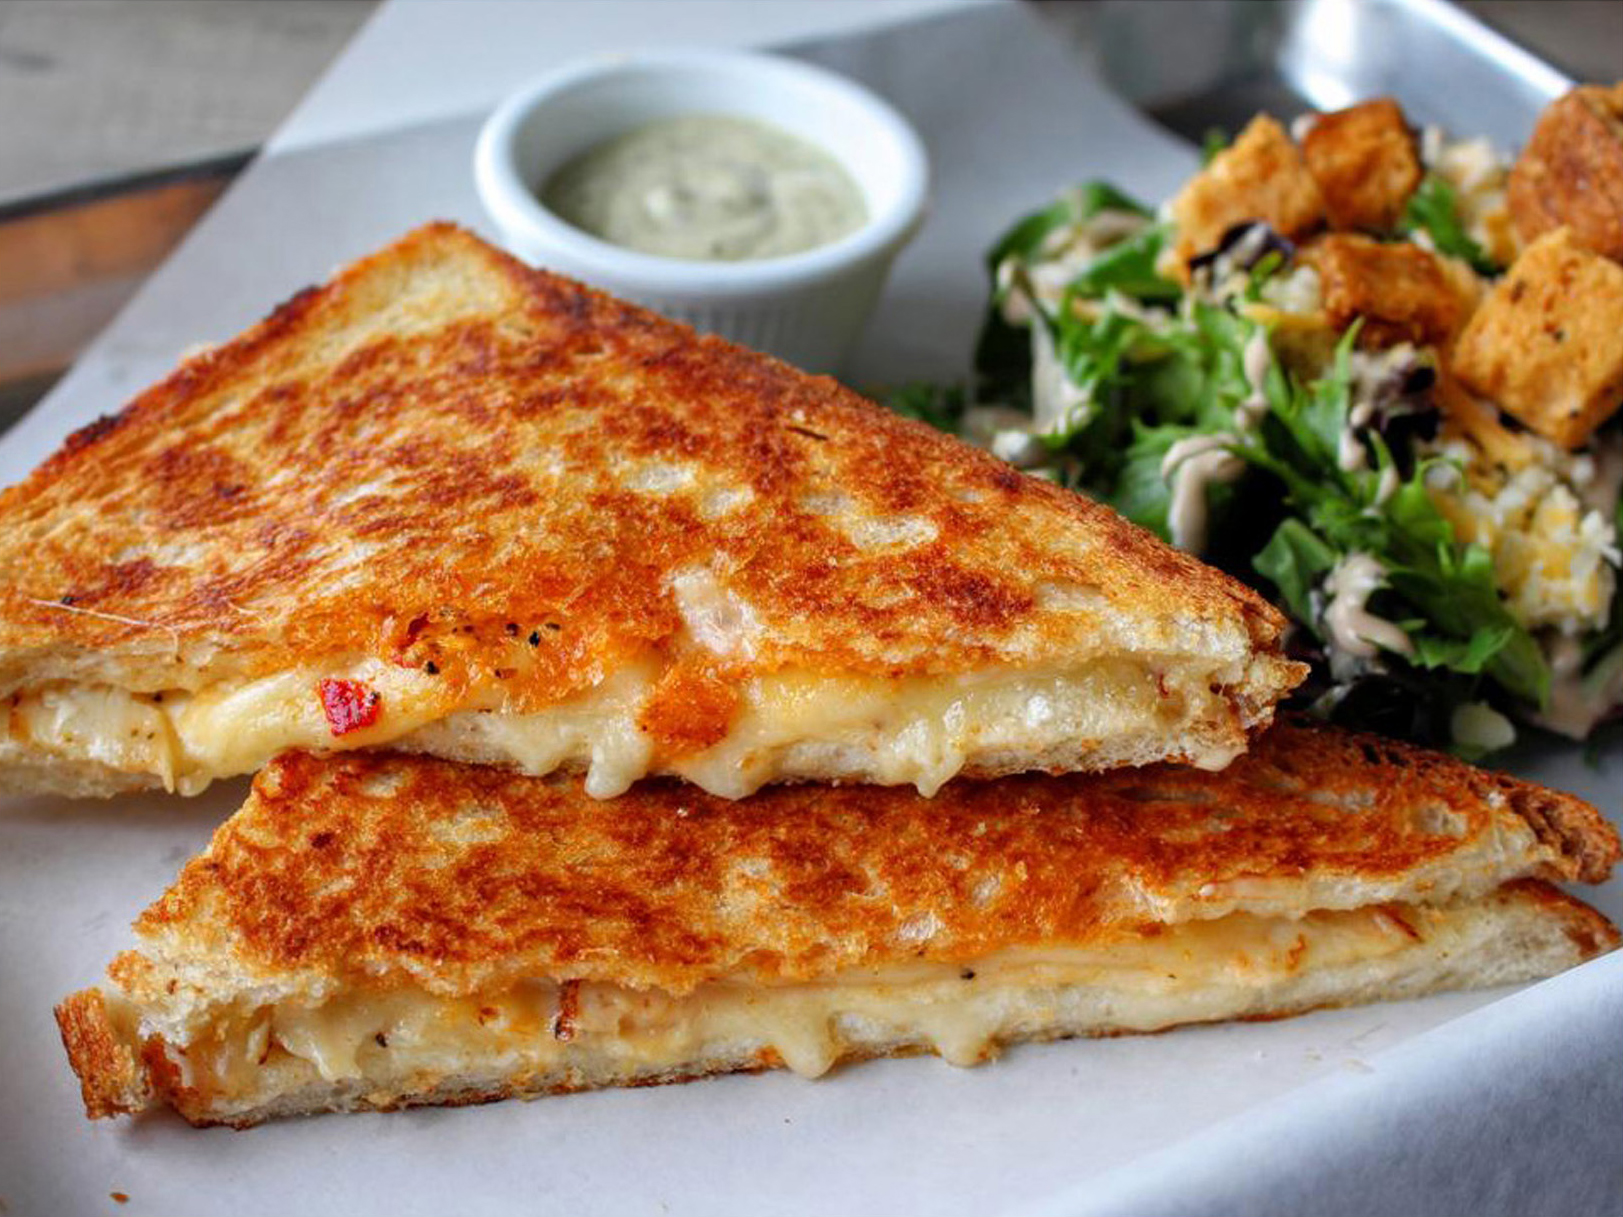 The 10 Best Places in America to Get a Grilled Cheese Sandwich, According to Yelp Reviewers